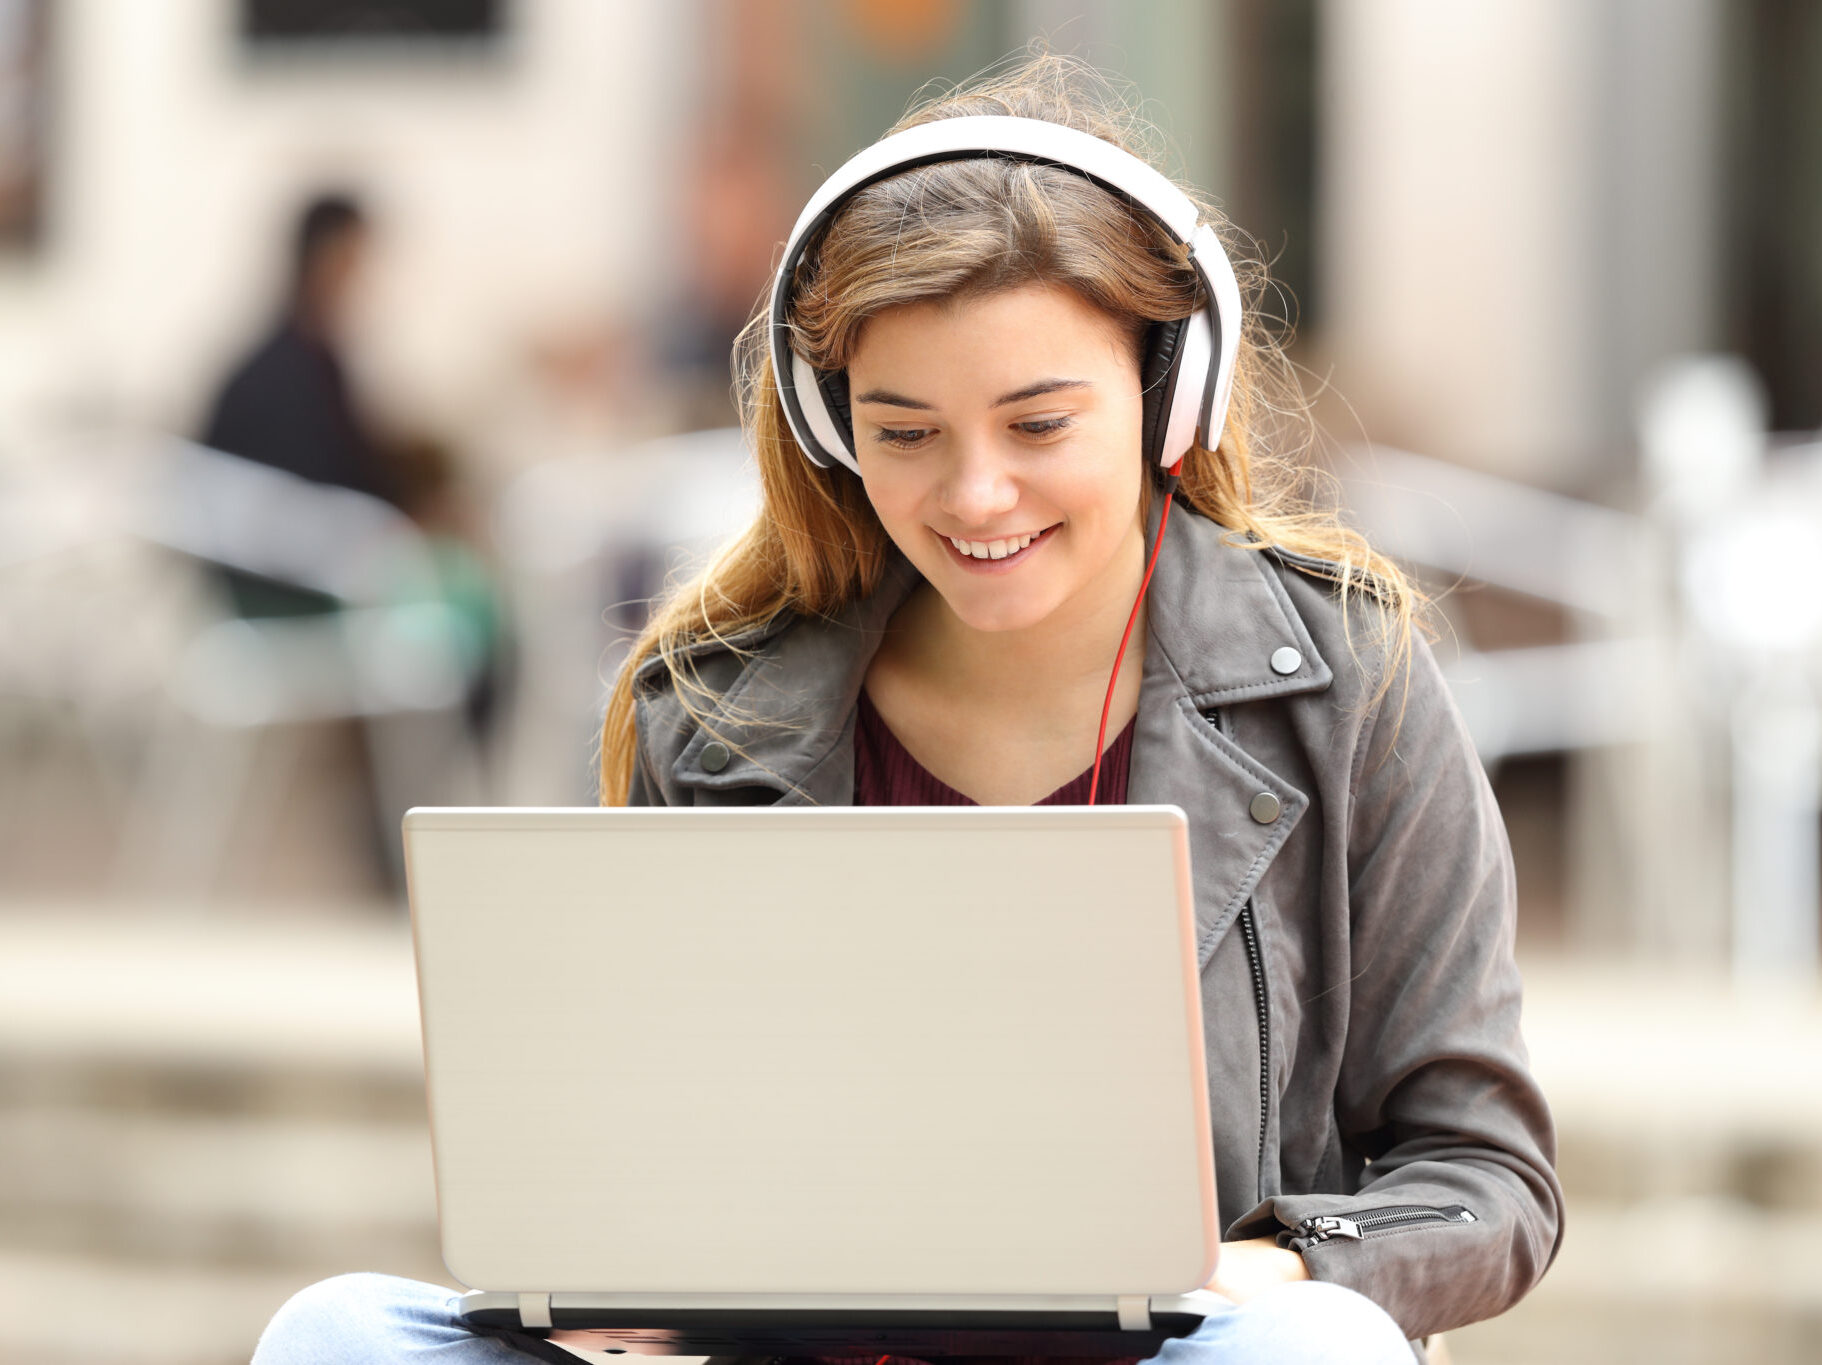 female student sitting outside on laptop with headphones, smiling